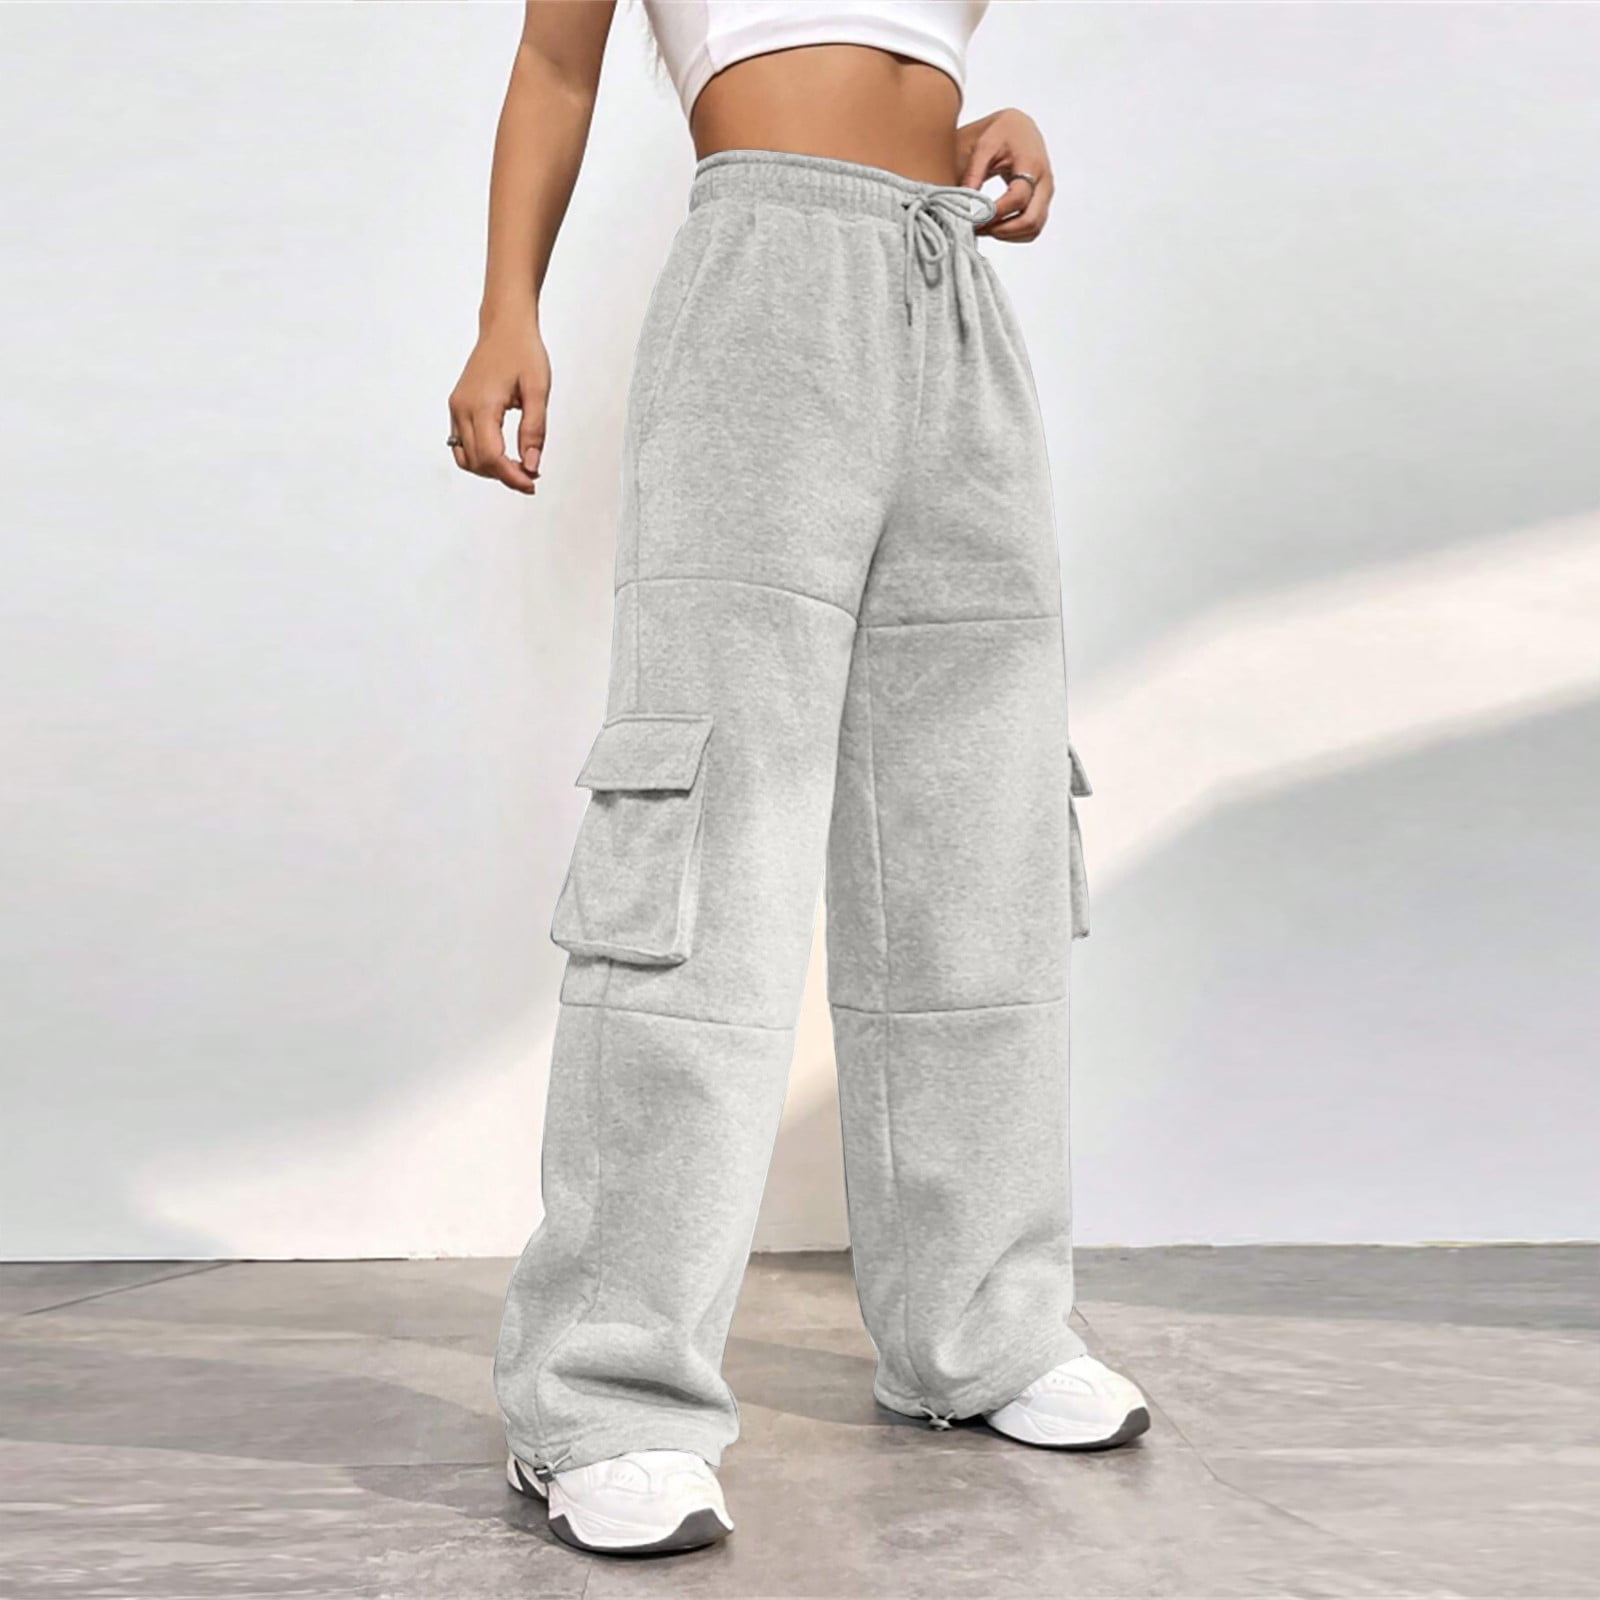 Buy Cinch Bottom Sweatpants Women Aesthetic Clothes Joggers for